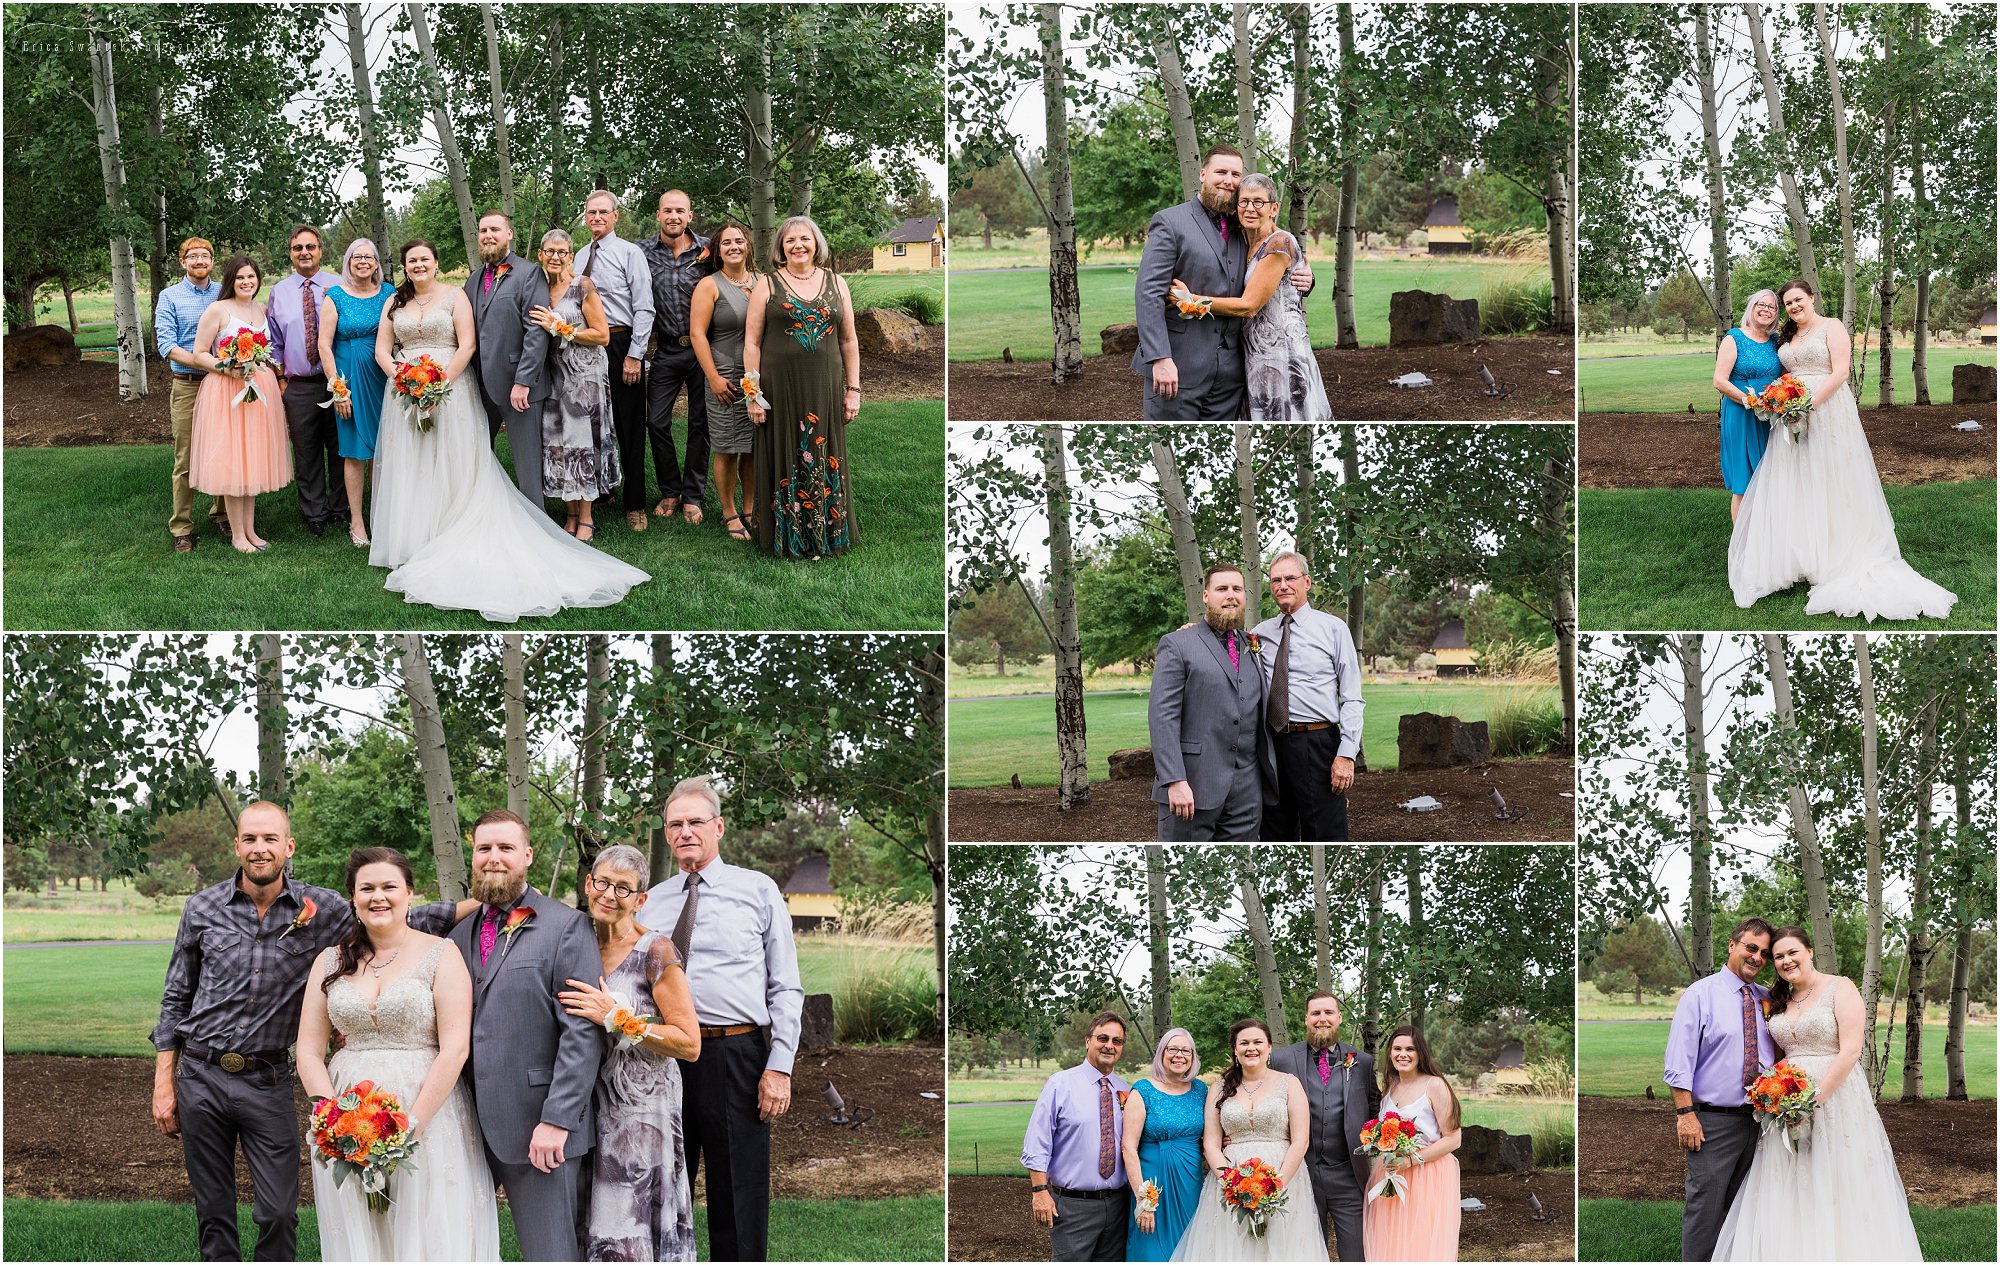 Beautiful family portraits before this couple ties the knot near Bend, OR. | Erica Swantek Photography